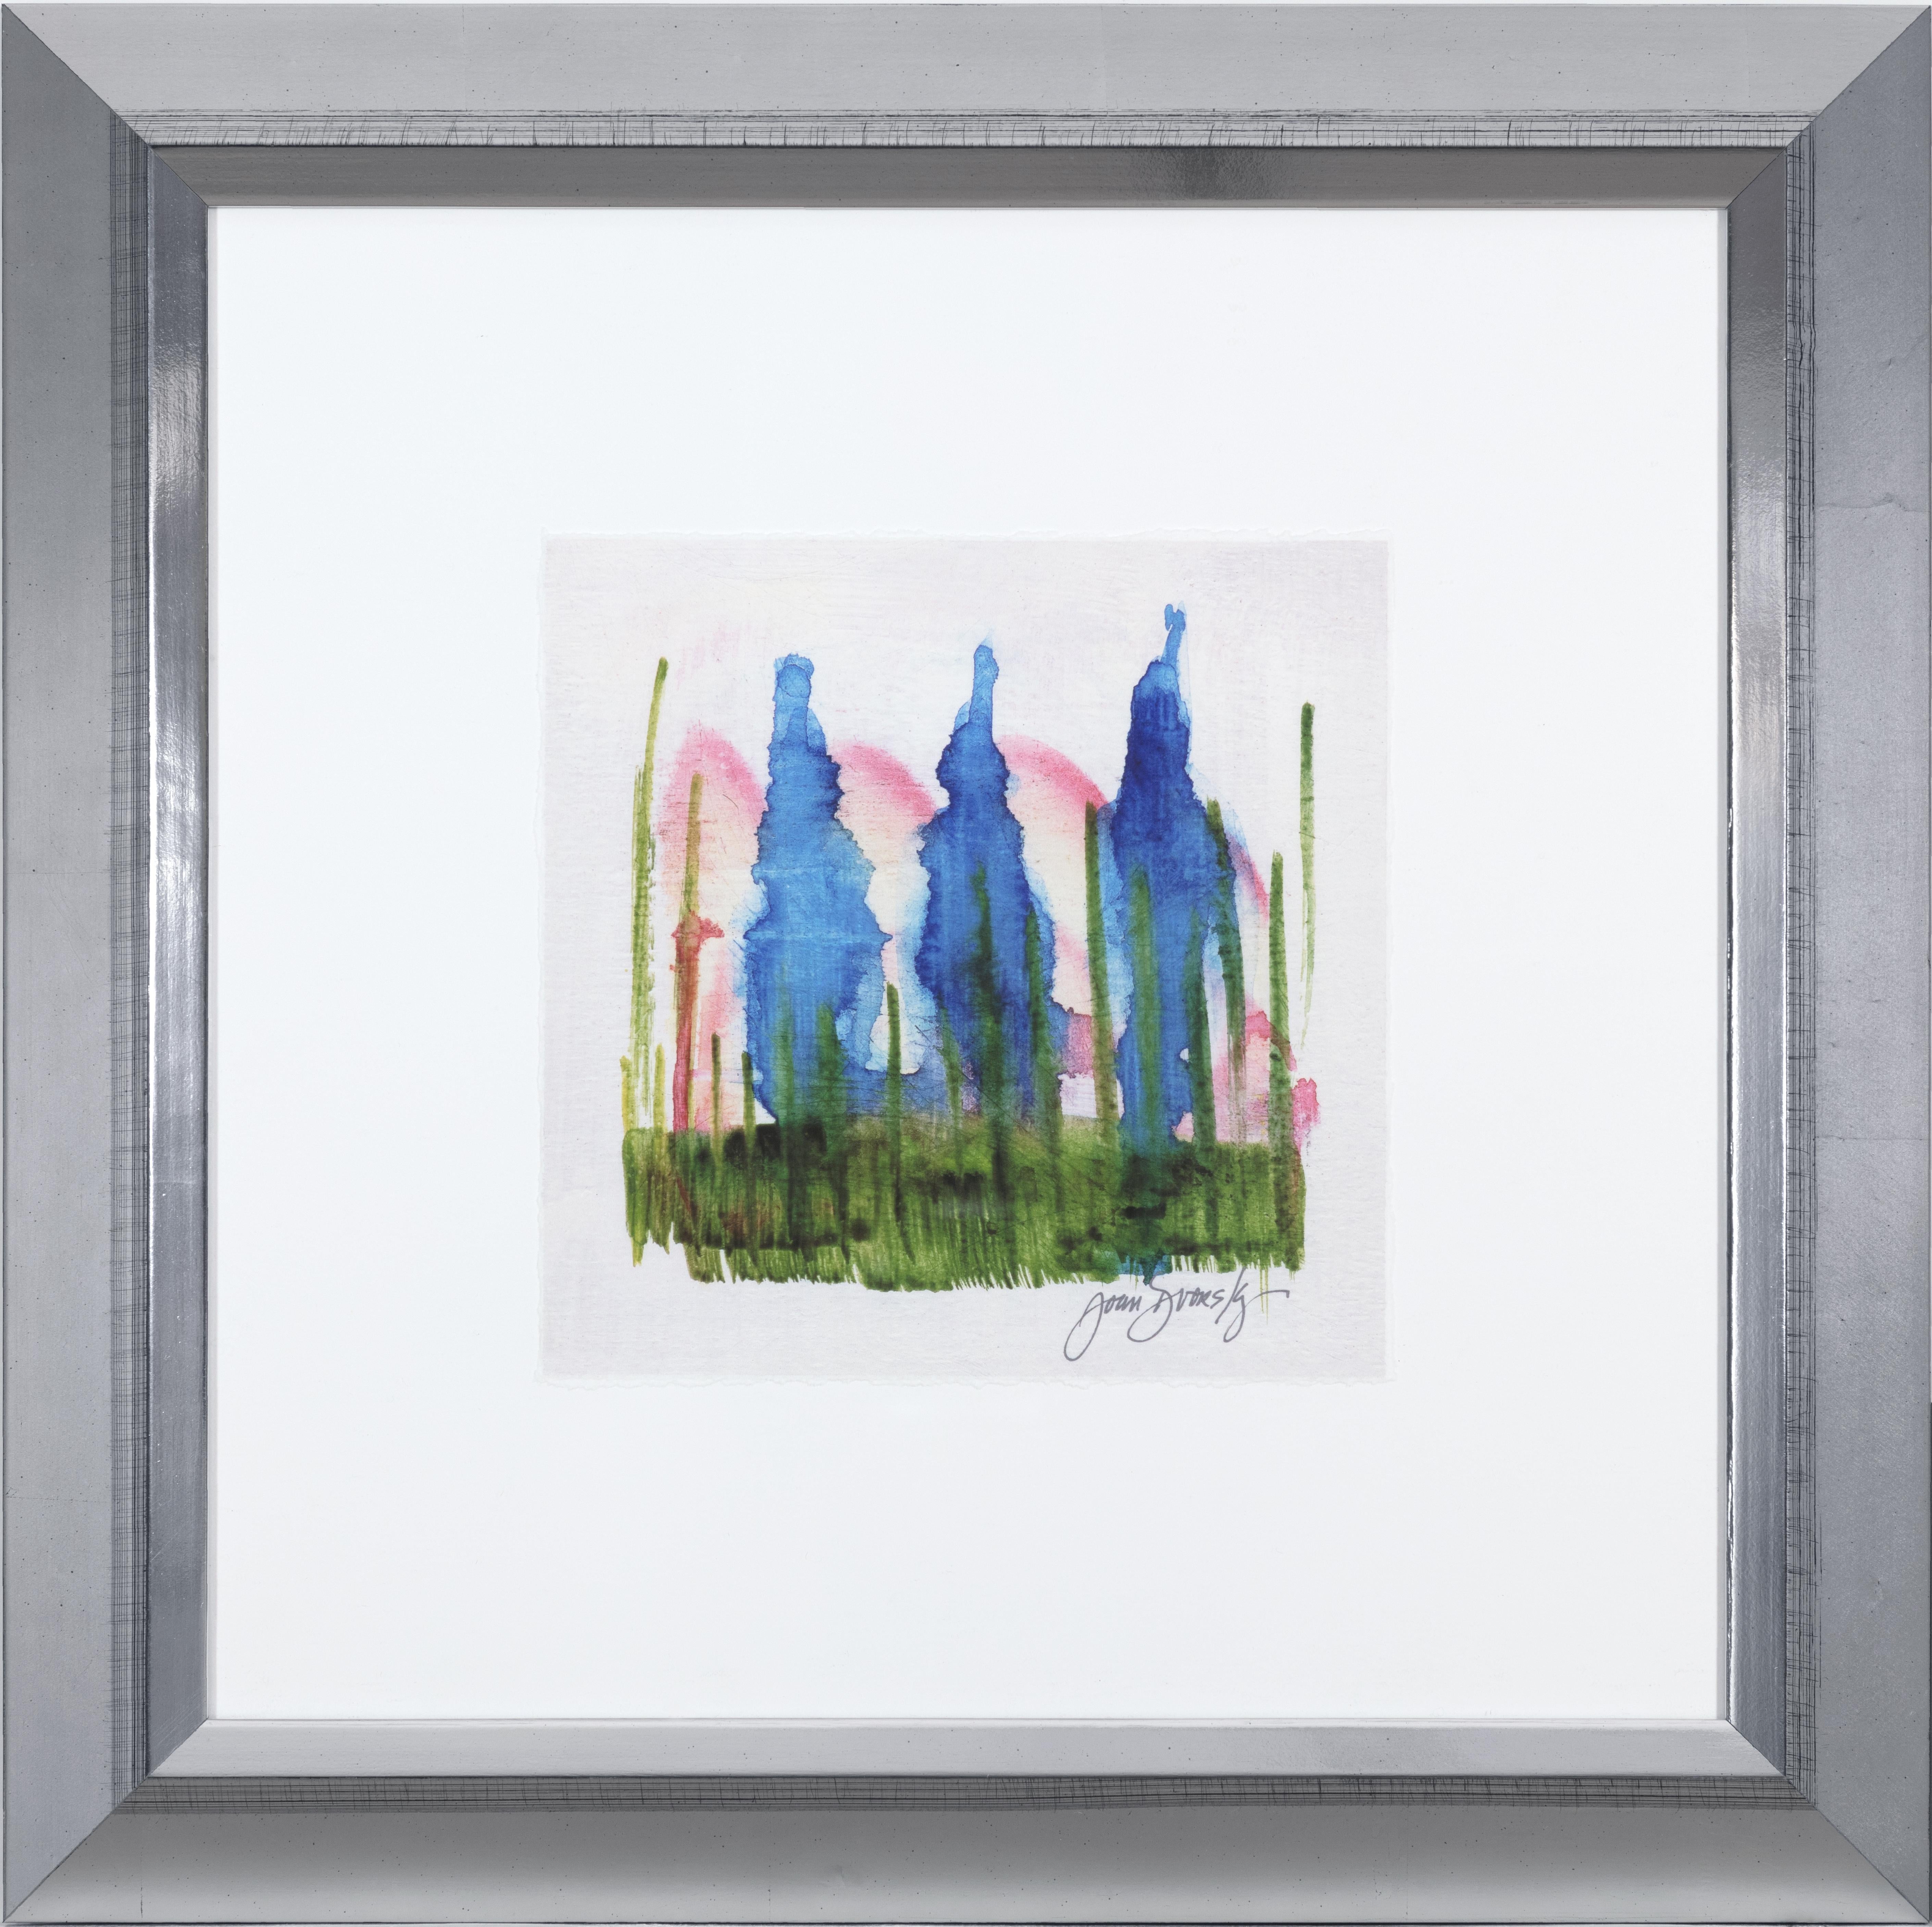 Joan Dvorsky Landscape Print - 'Three Trees' Giclee Print on Watercolor paper After Acrylic Painting